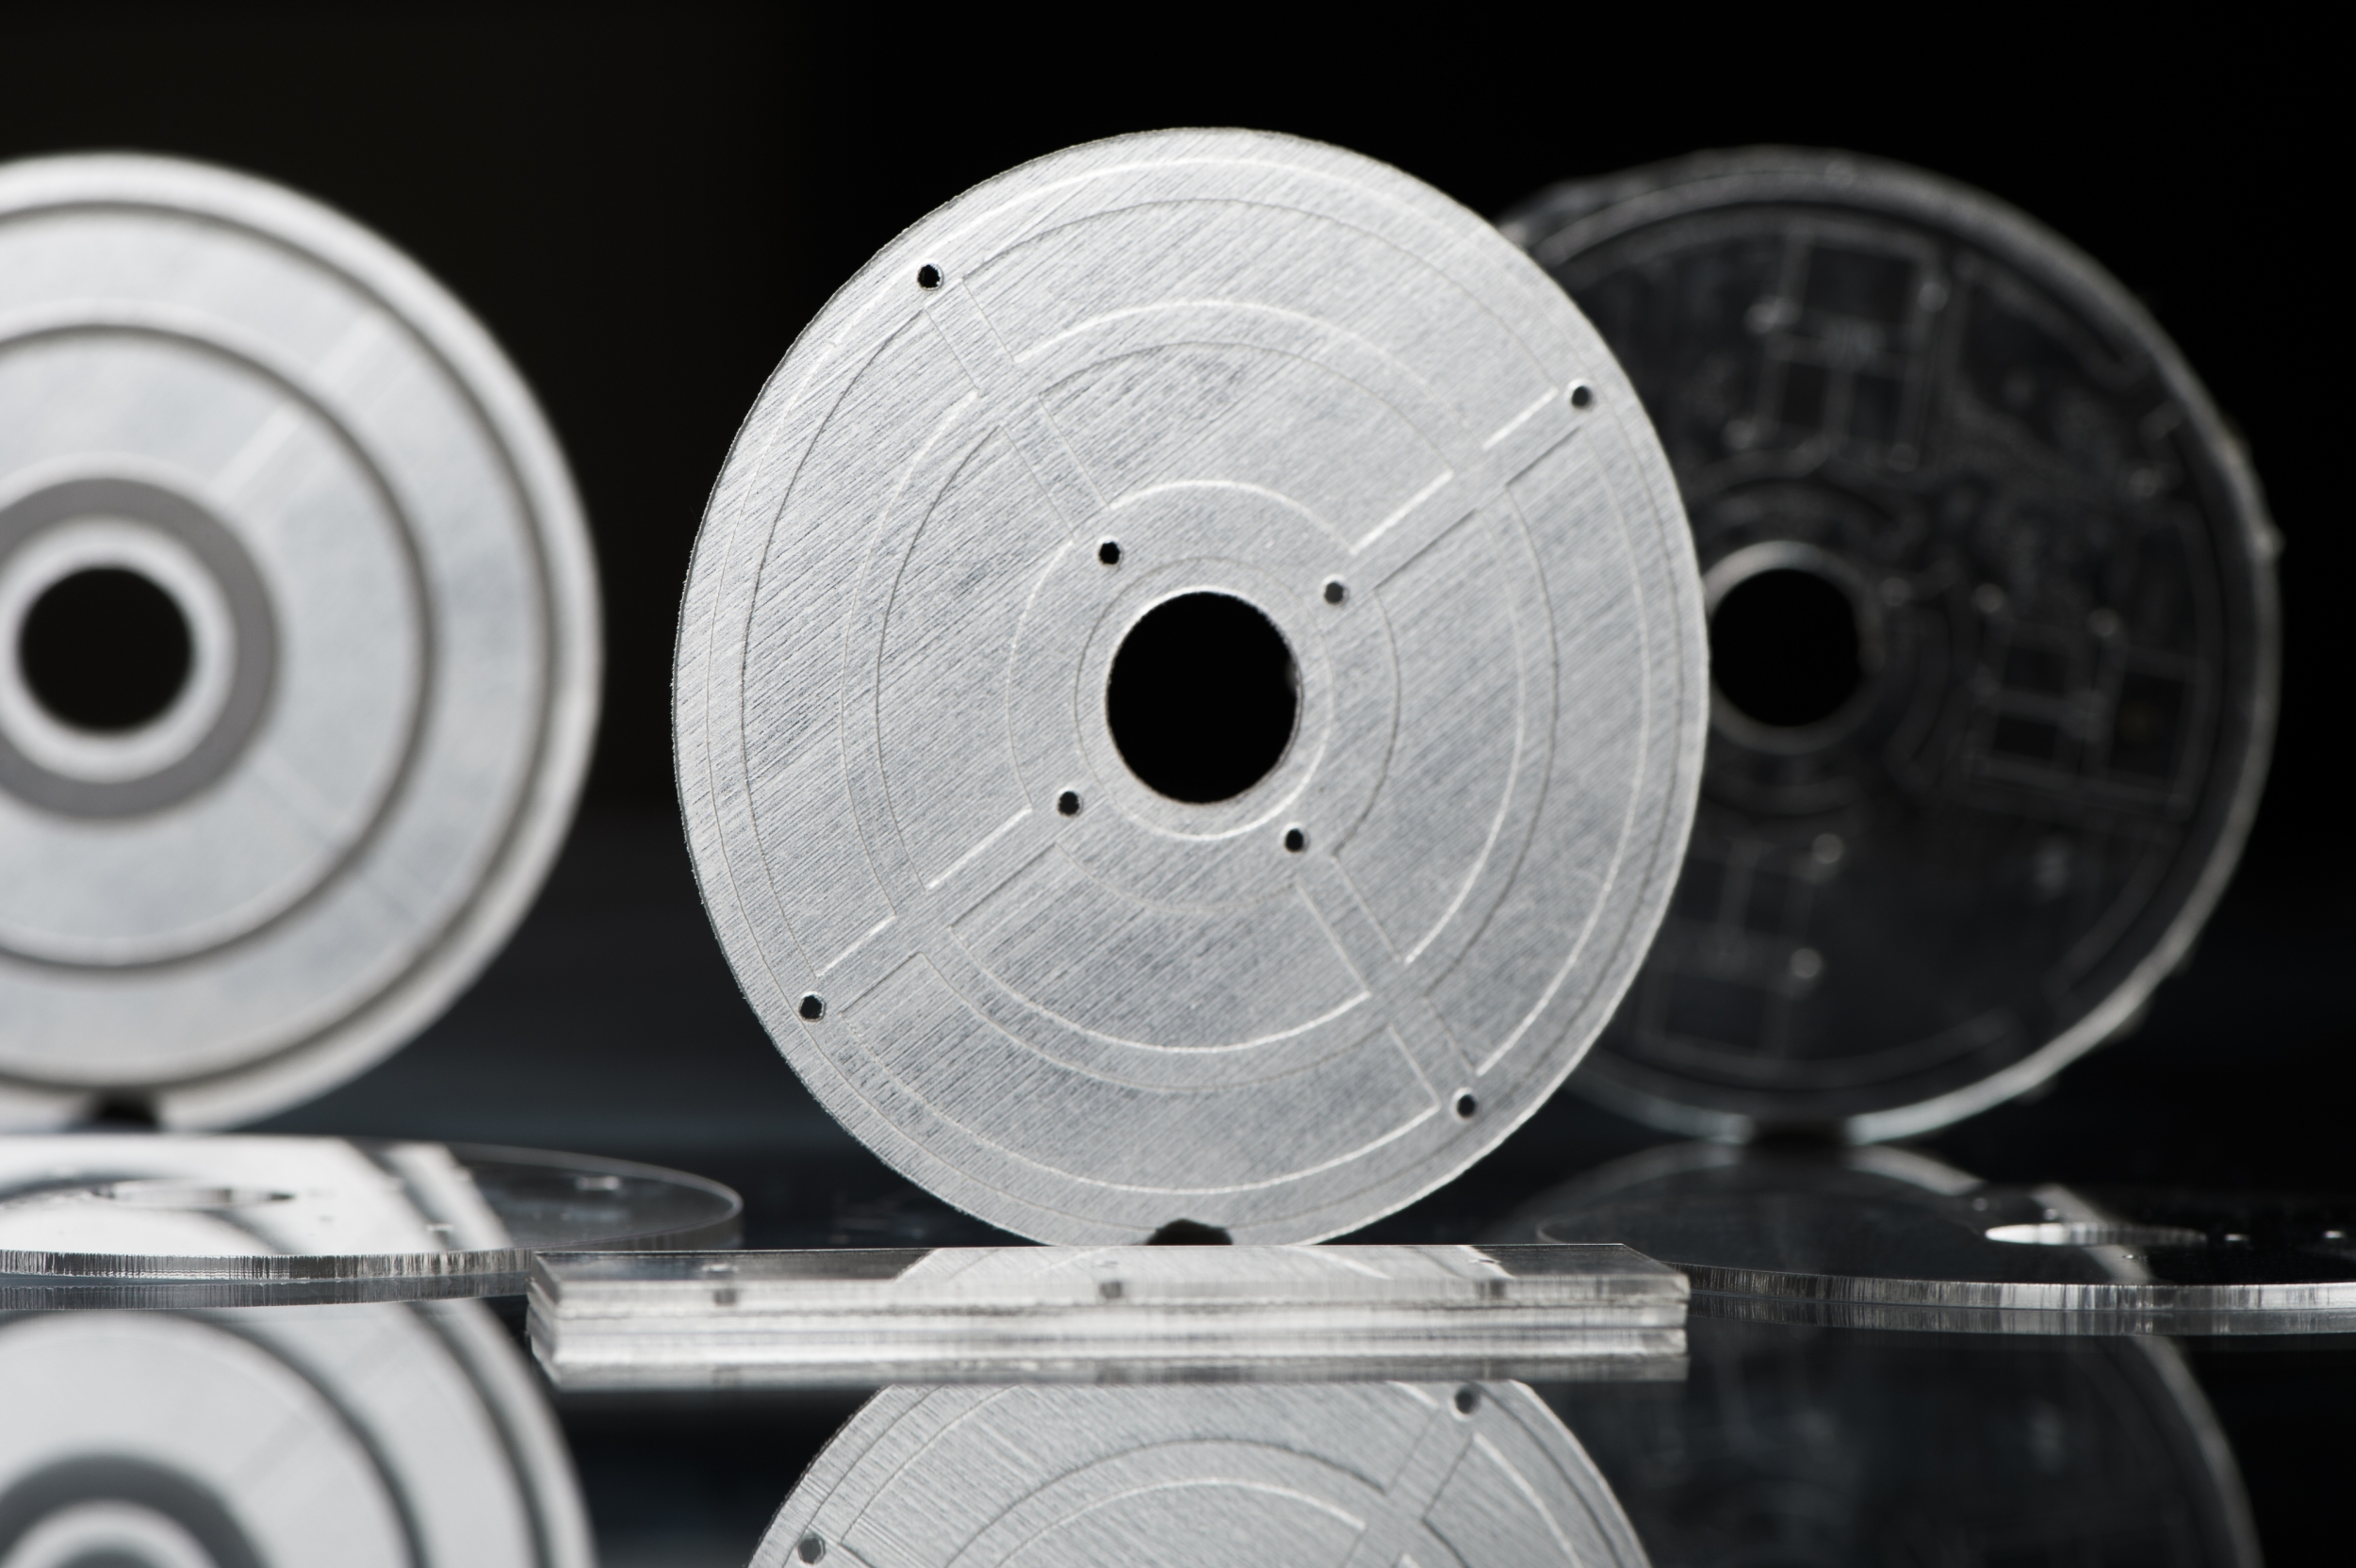 three disc-shaped microfluidic device that were 3D printed